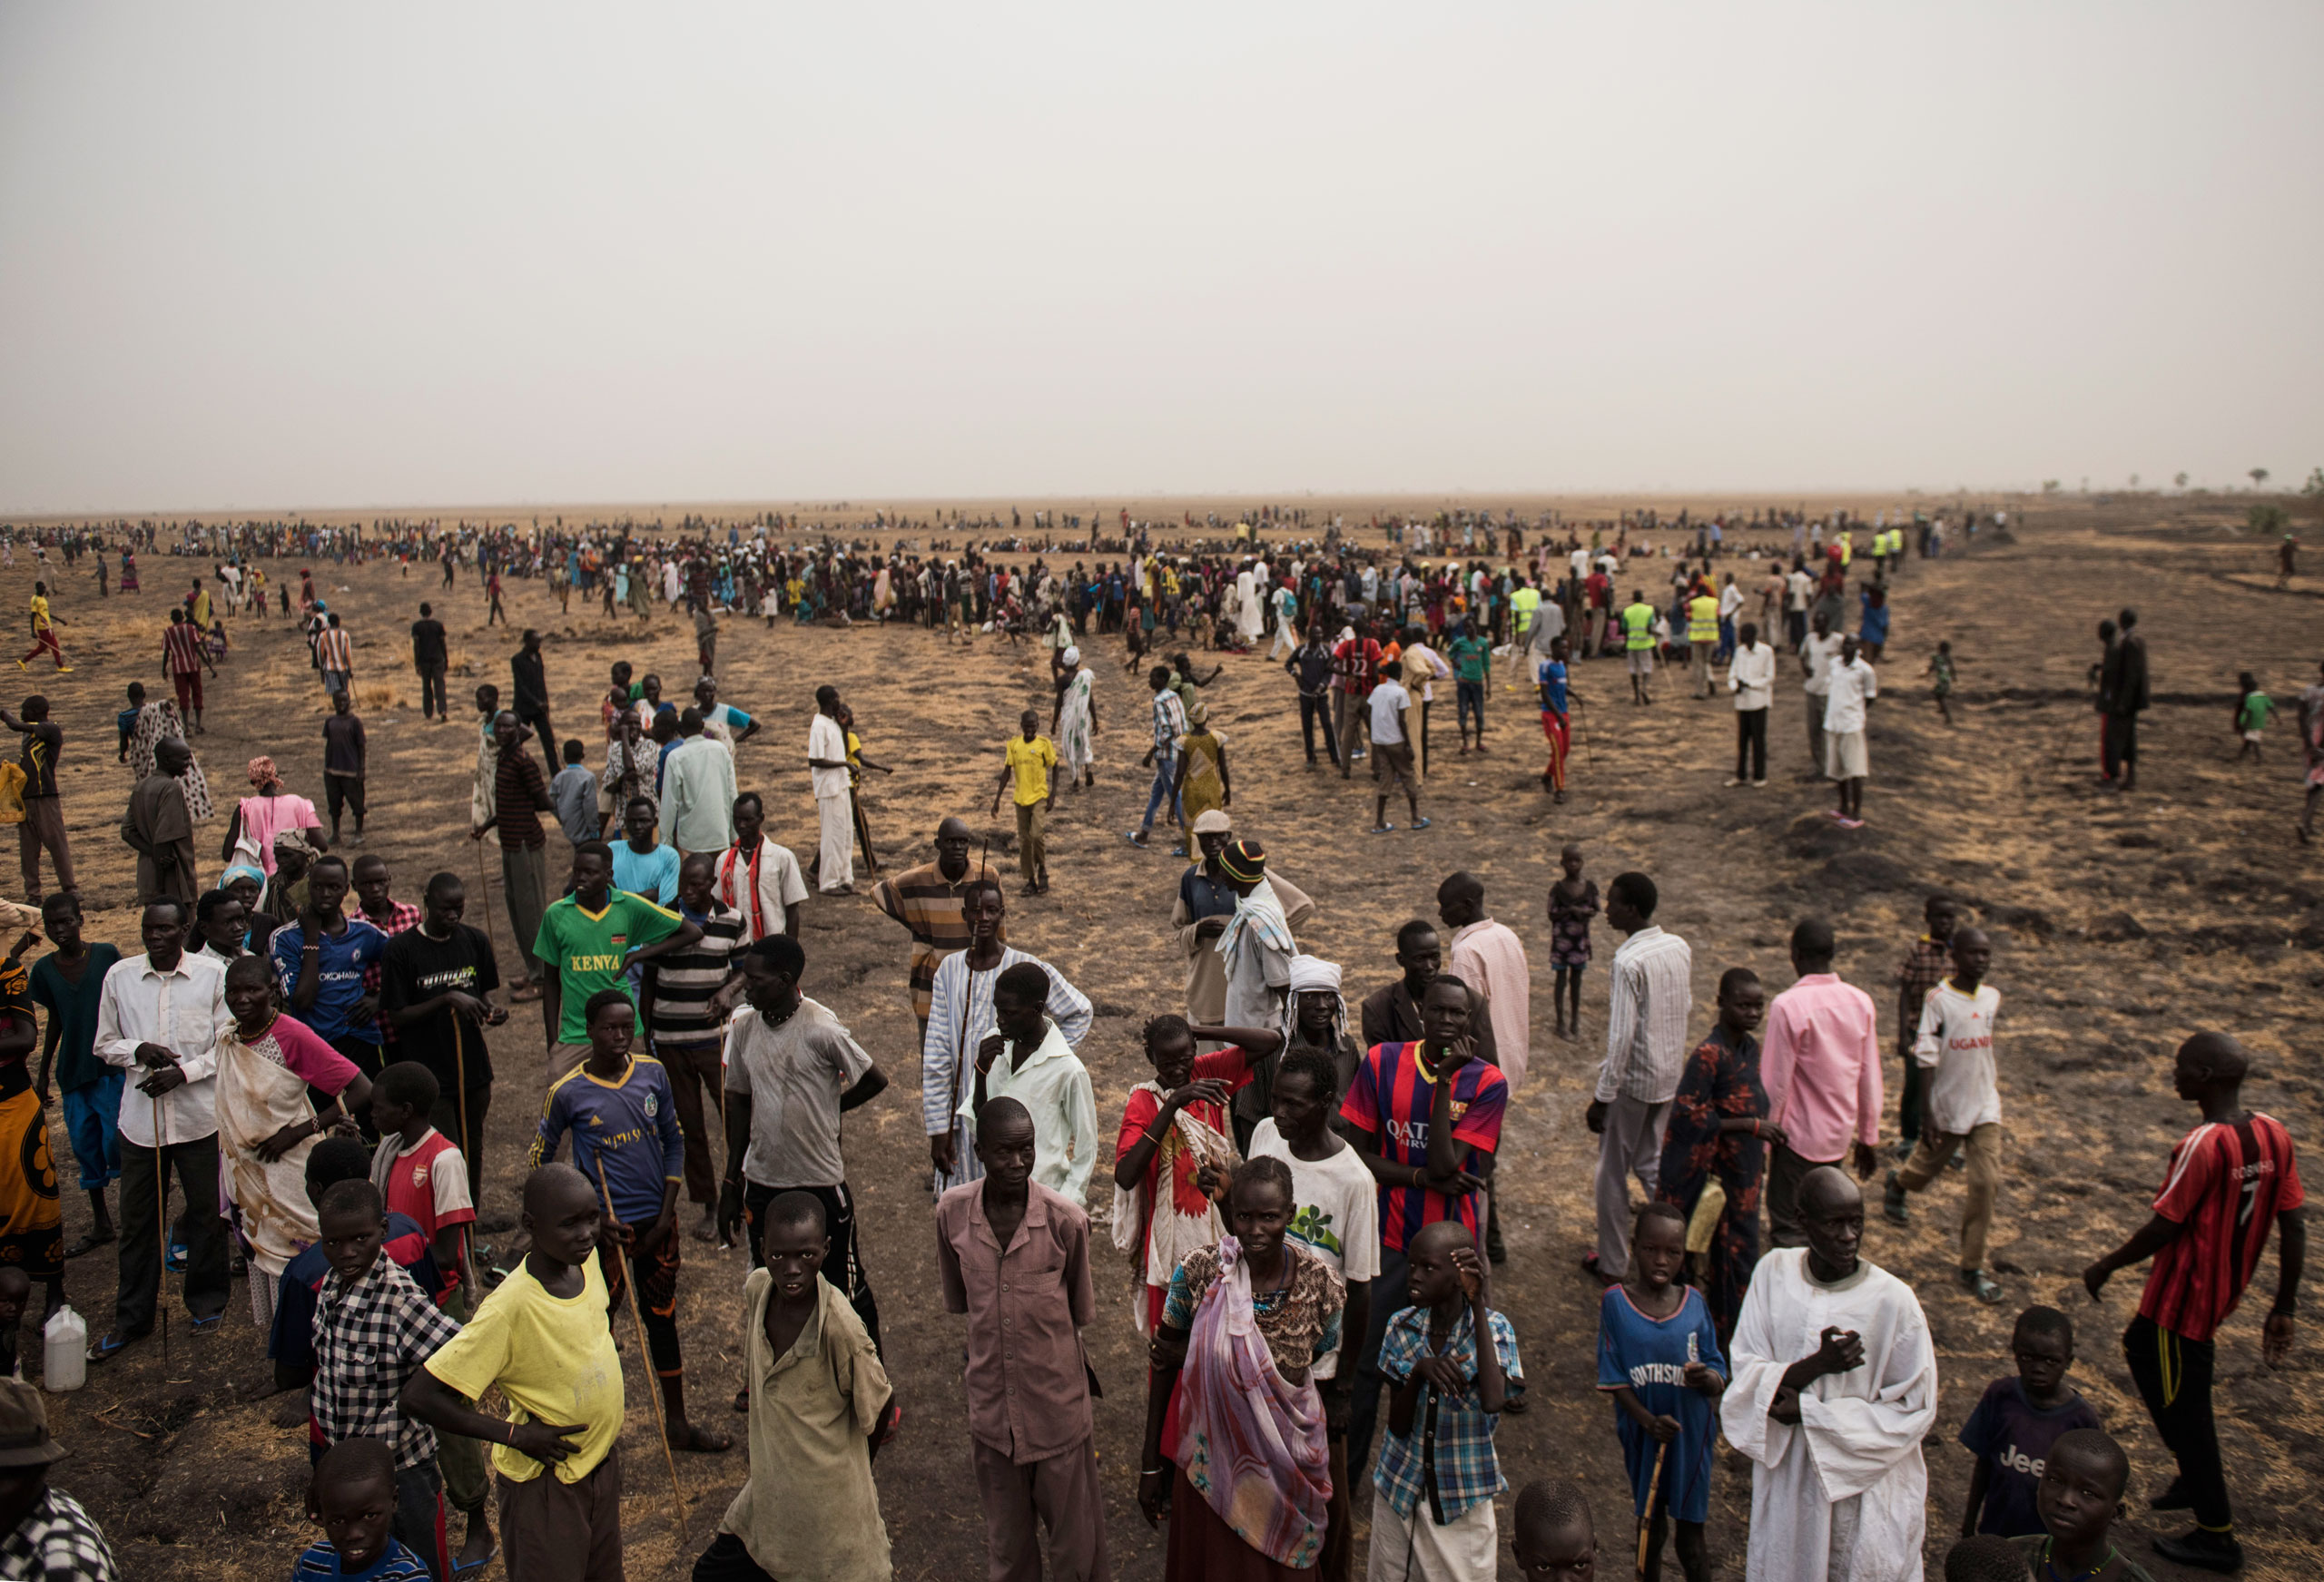 Tens of thousands of South Sudanese line up for food handouts on March 17. The fighting has left many in the country starving (Lynsey Addario—Getty Images Reportage for TIME)